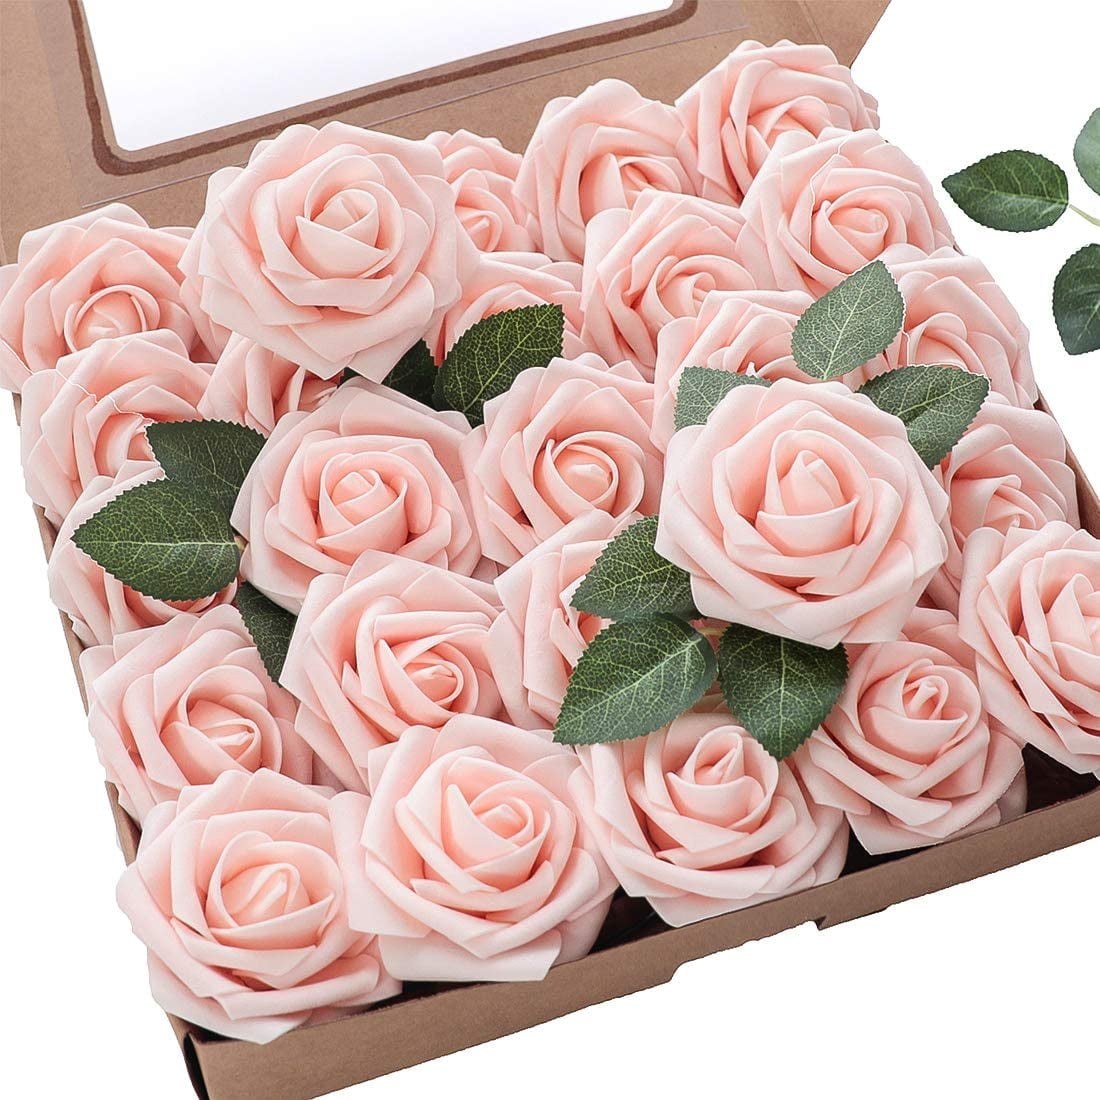 IPOPU Fake Flower Heads 25pcs Artificial Roses Bulk Dried Flowers with  Stems Decorative Flowers for Head Table Wedding Decorations Dining Table  Decor